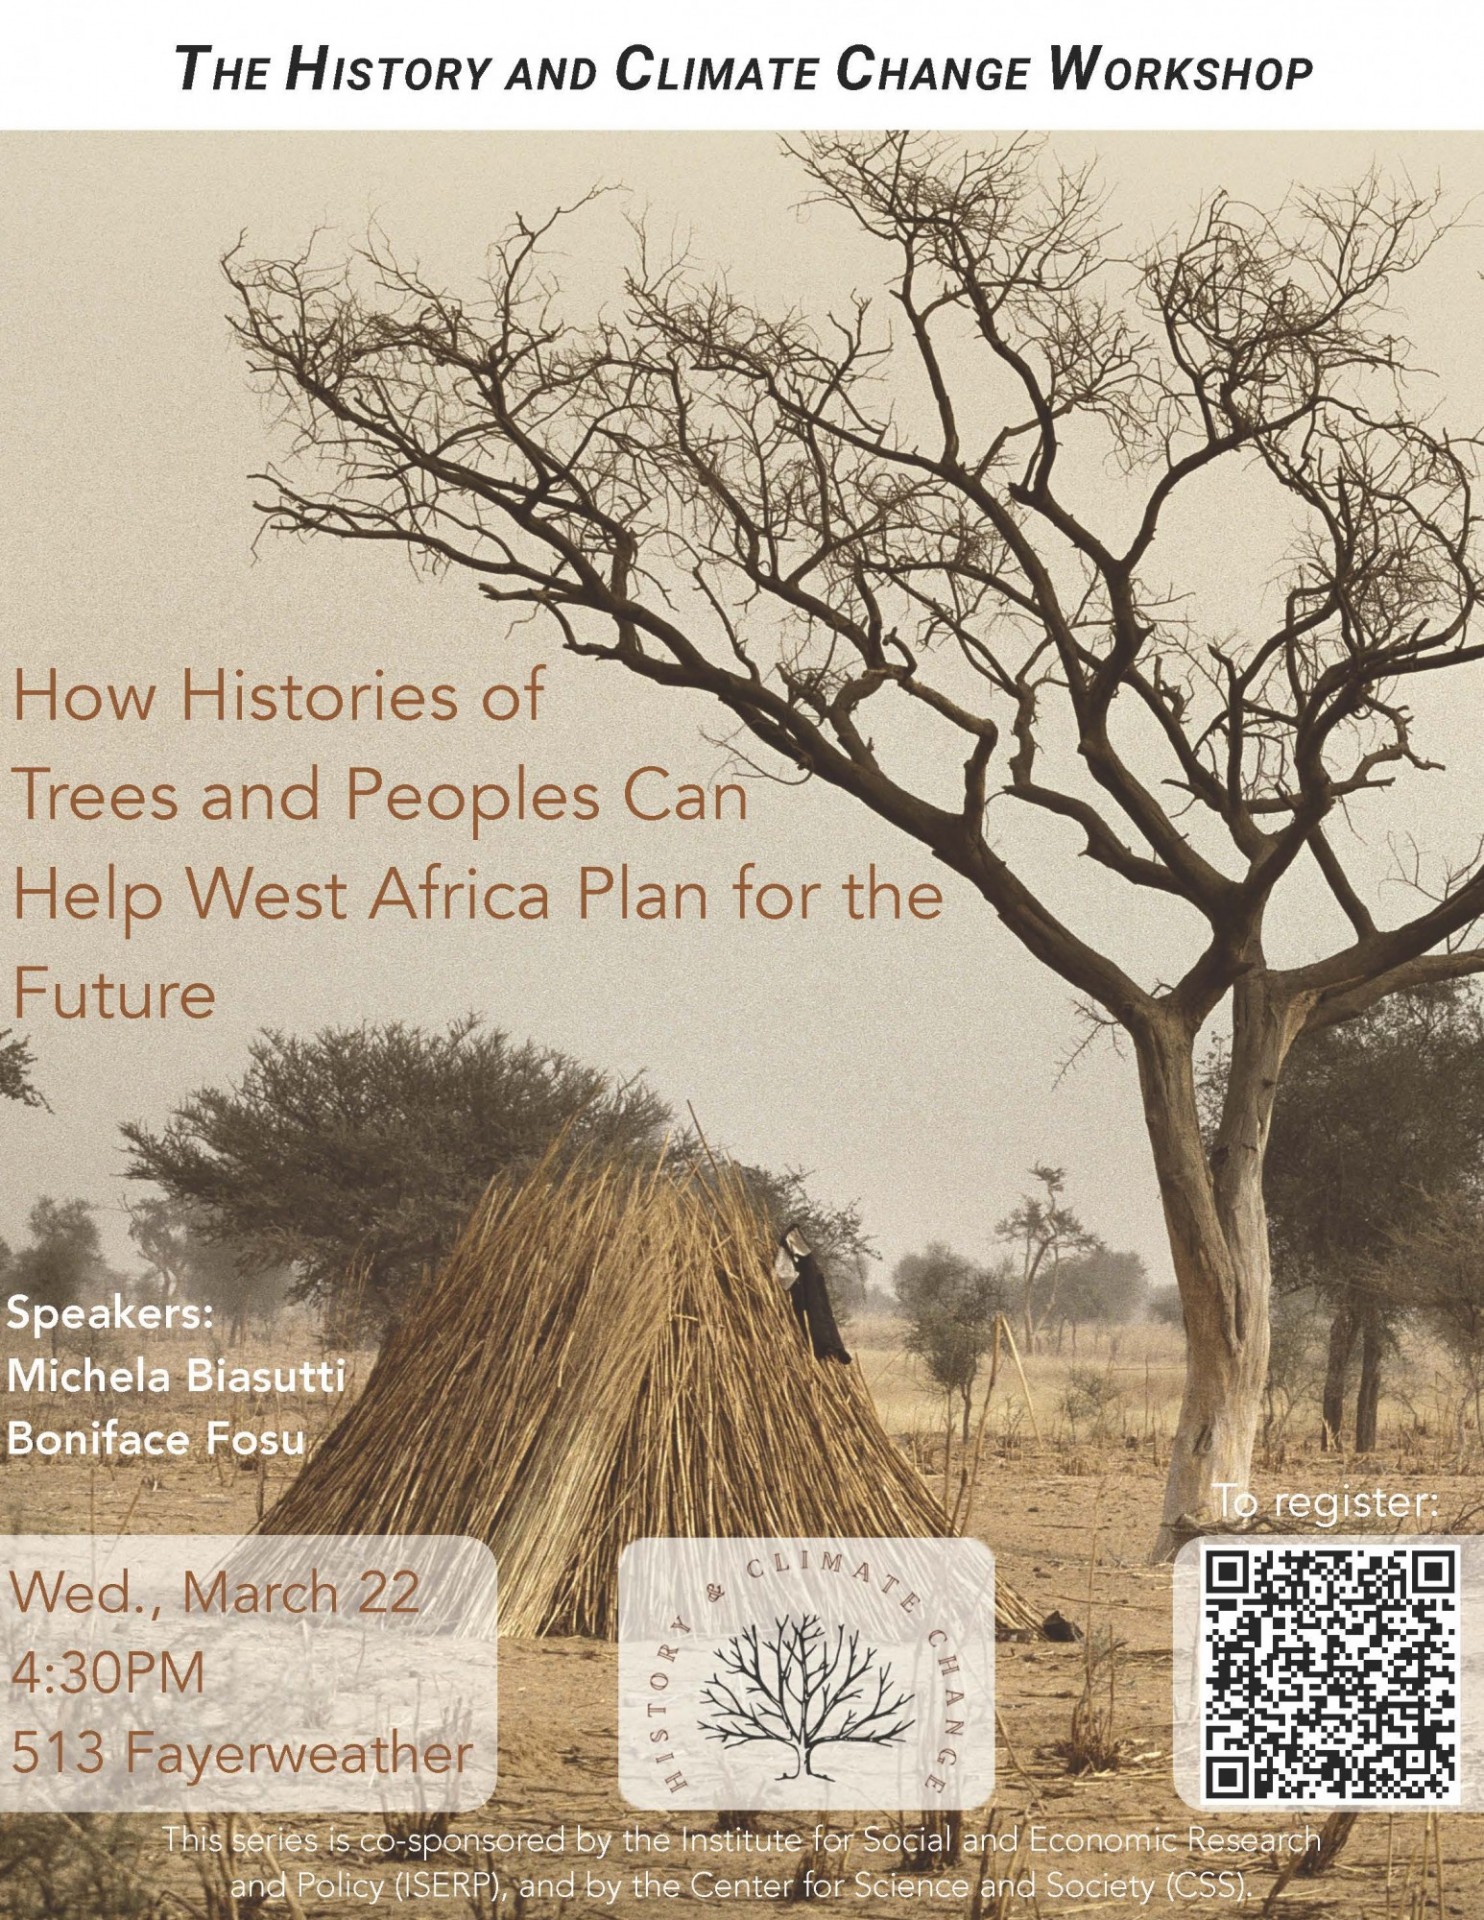 History and Climate Change: How Histories of Trees and Peoples Can Help West Africa Plan for the Future